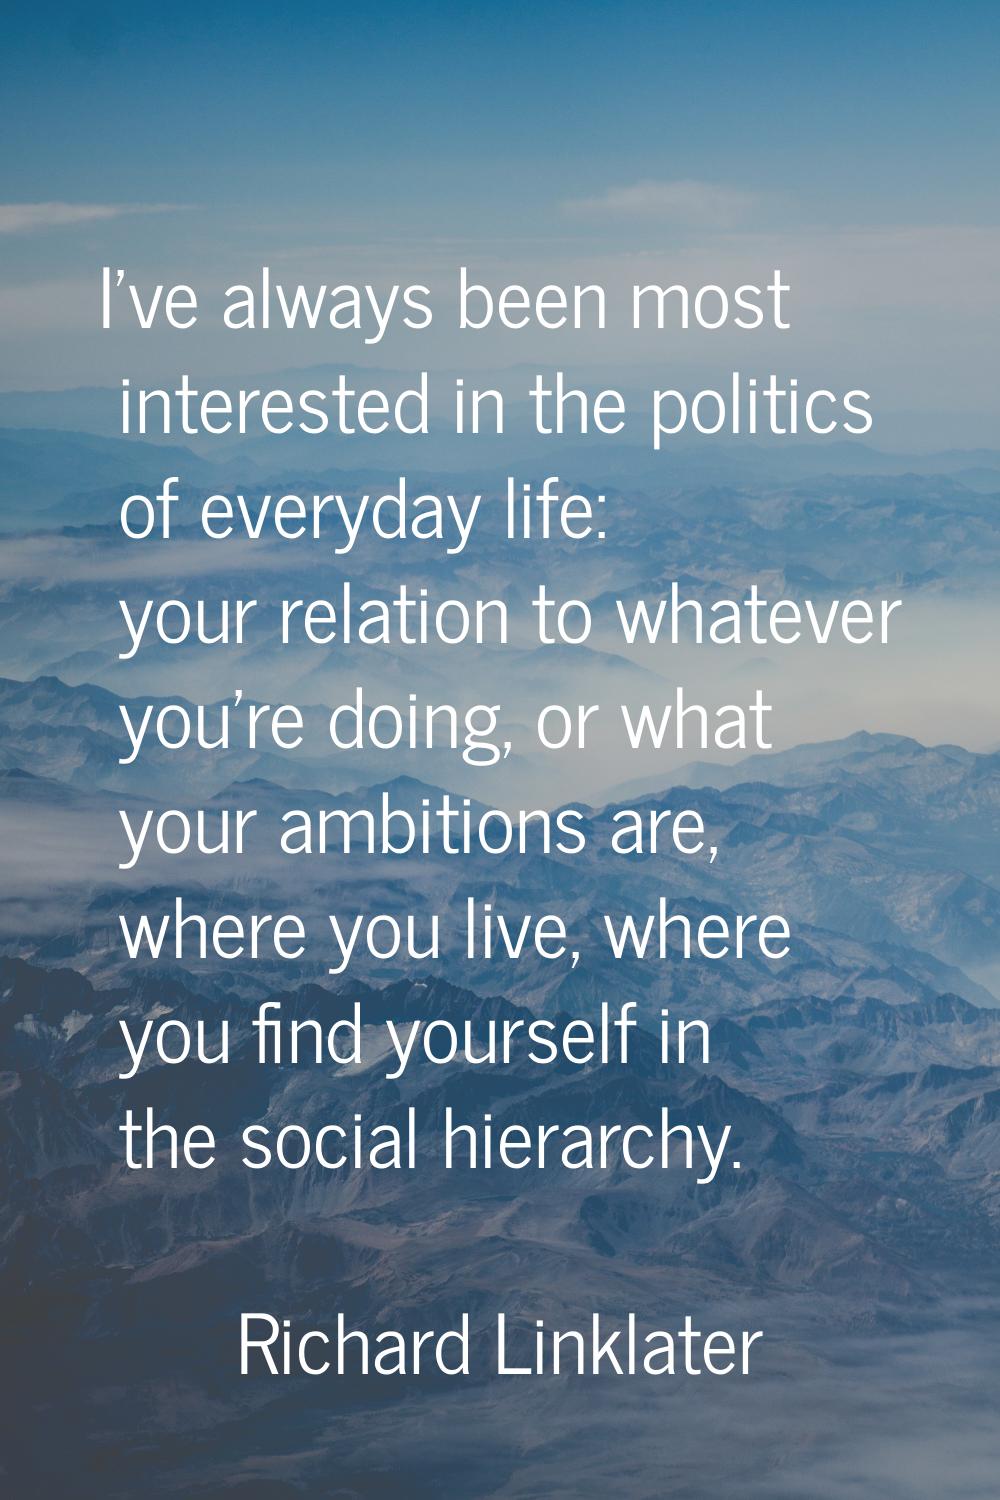 I've always been most interested in the politics of everyday life: your relation to whatever you're